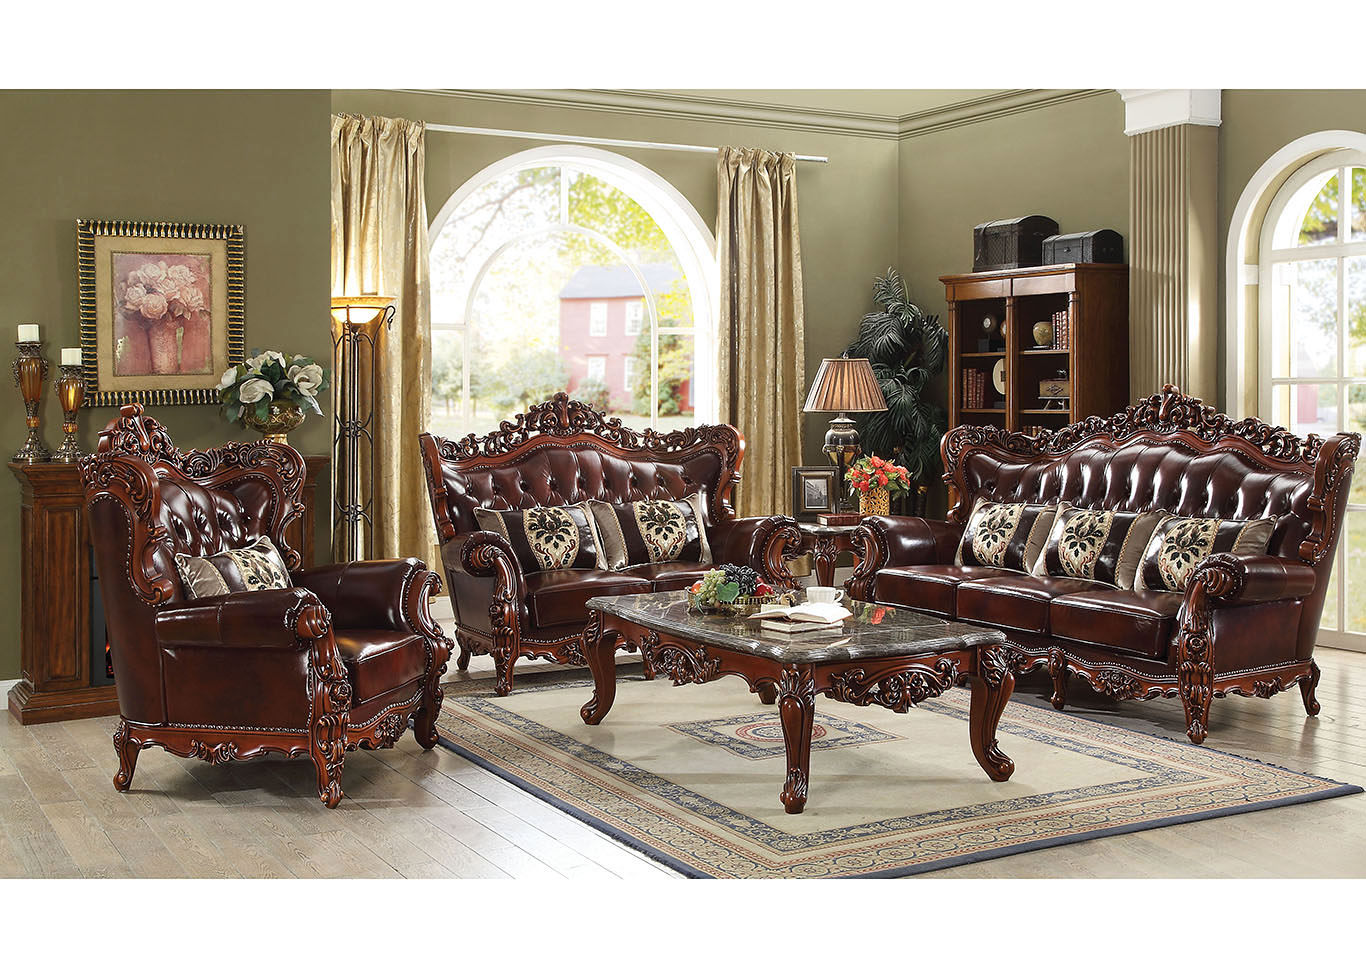 Eustoma Brown Match Sofa and Loveseat w/Pillow,Acme